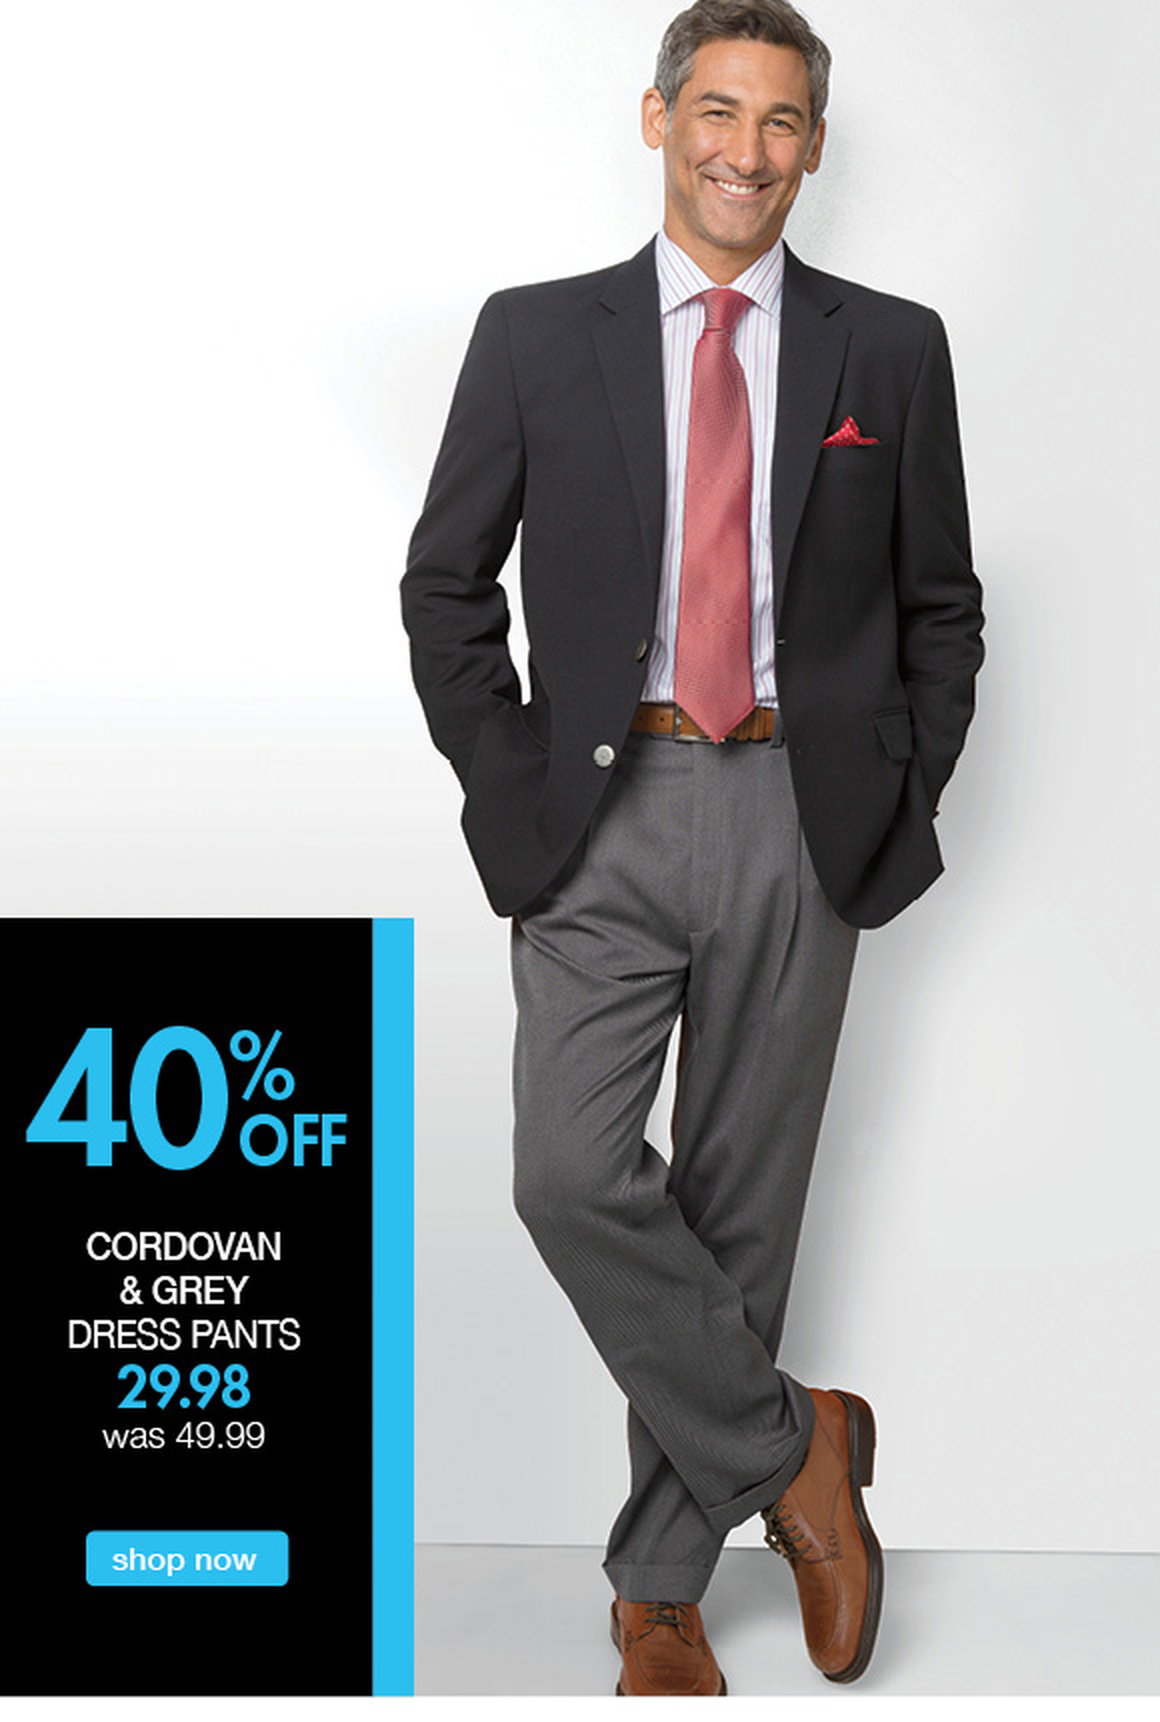 Stein Mart: Today Only! 40% Off Men's pants & shirts, 50% Ladies